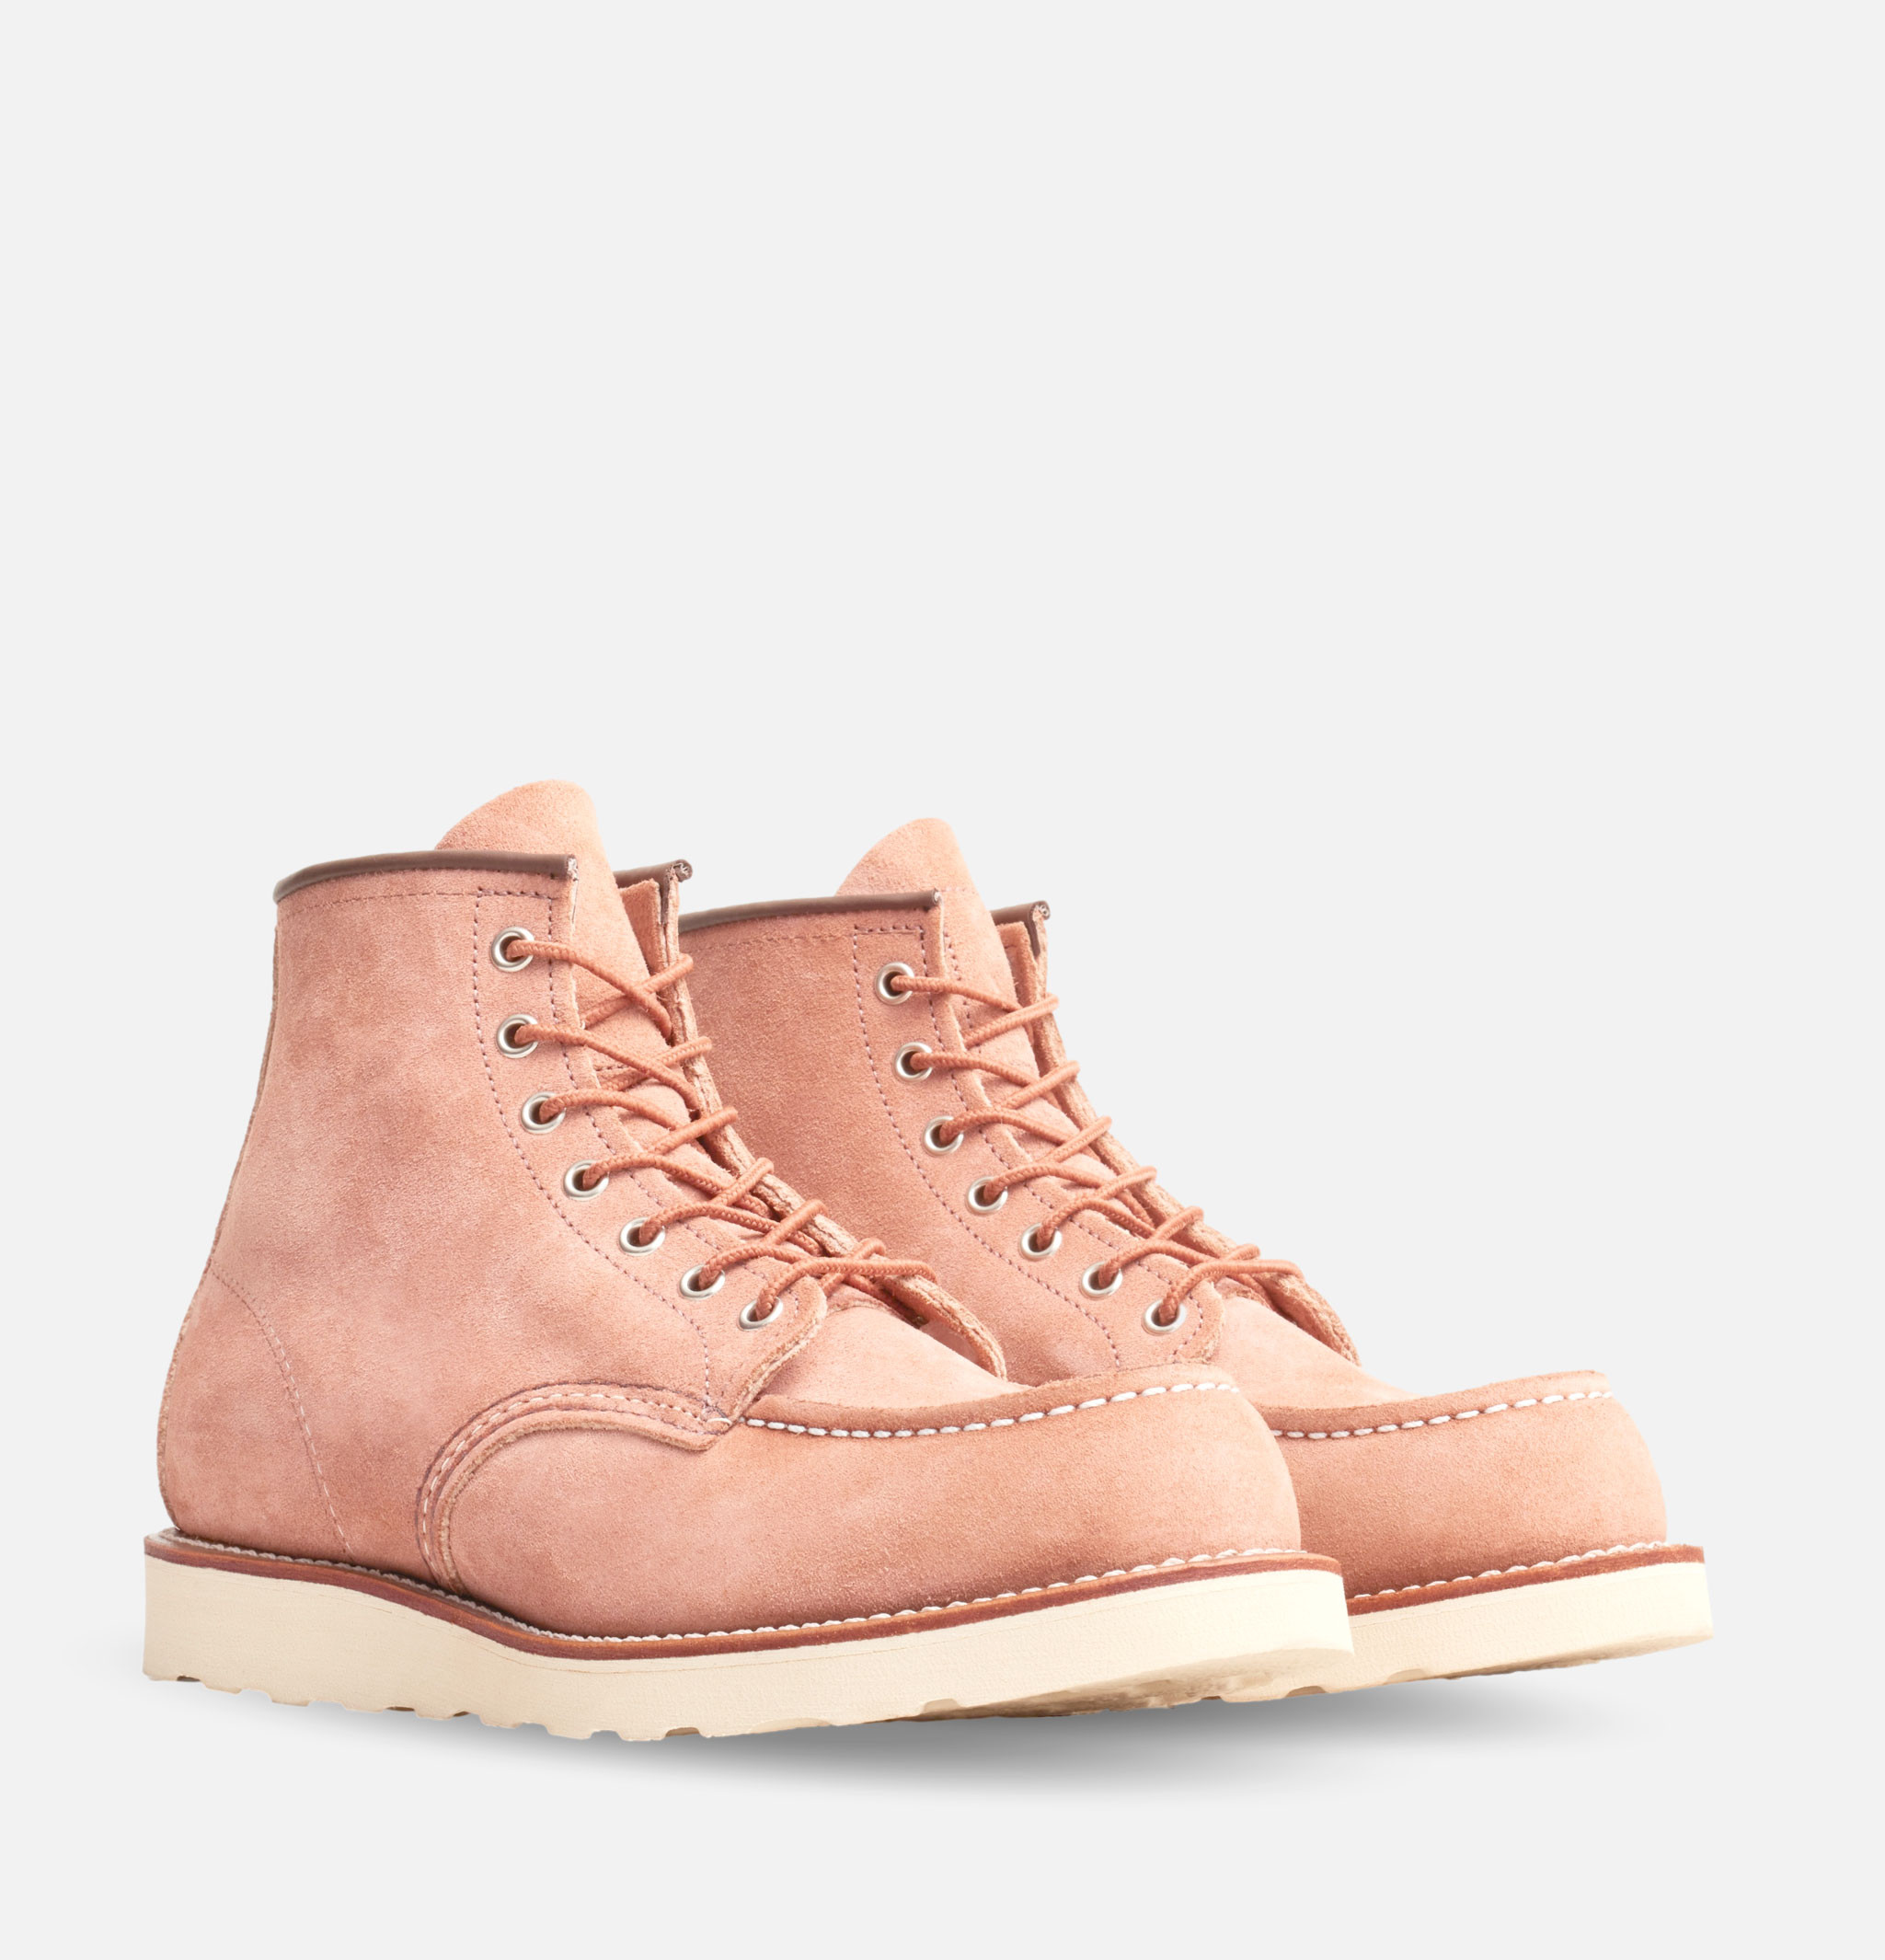 Red Wing Shoes 8208 Moc Toe